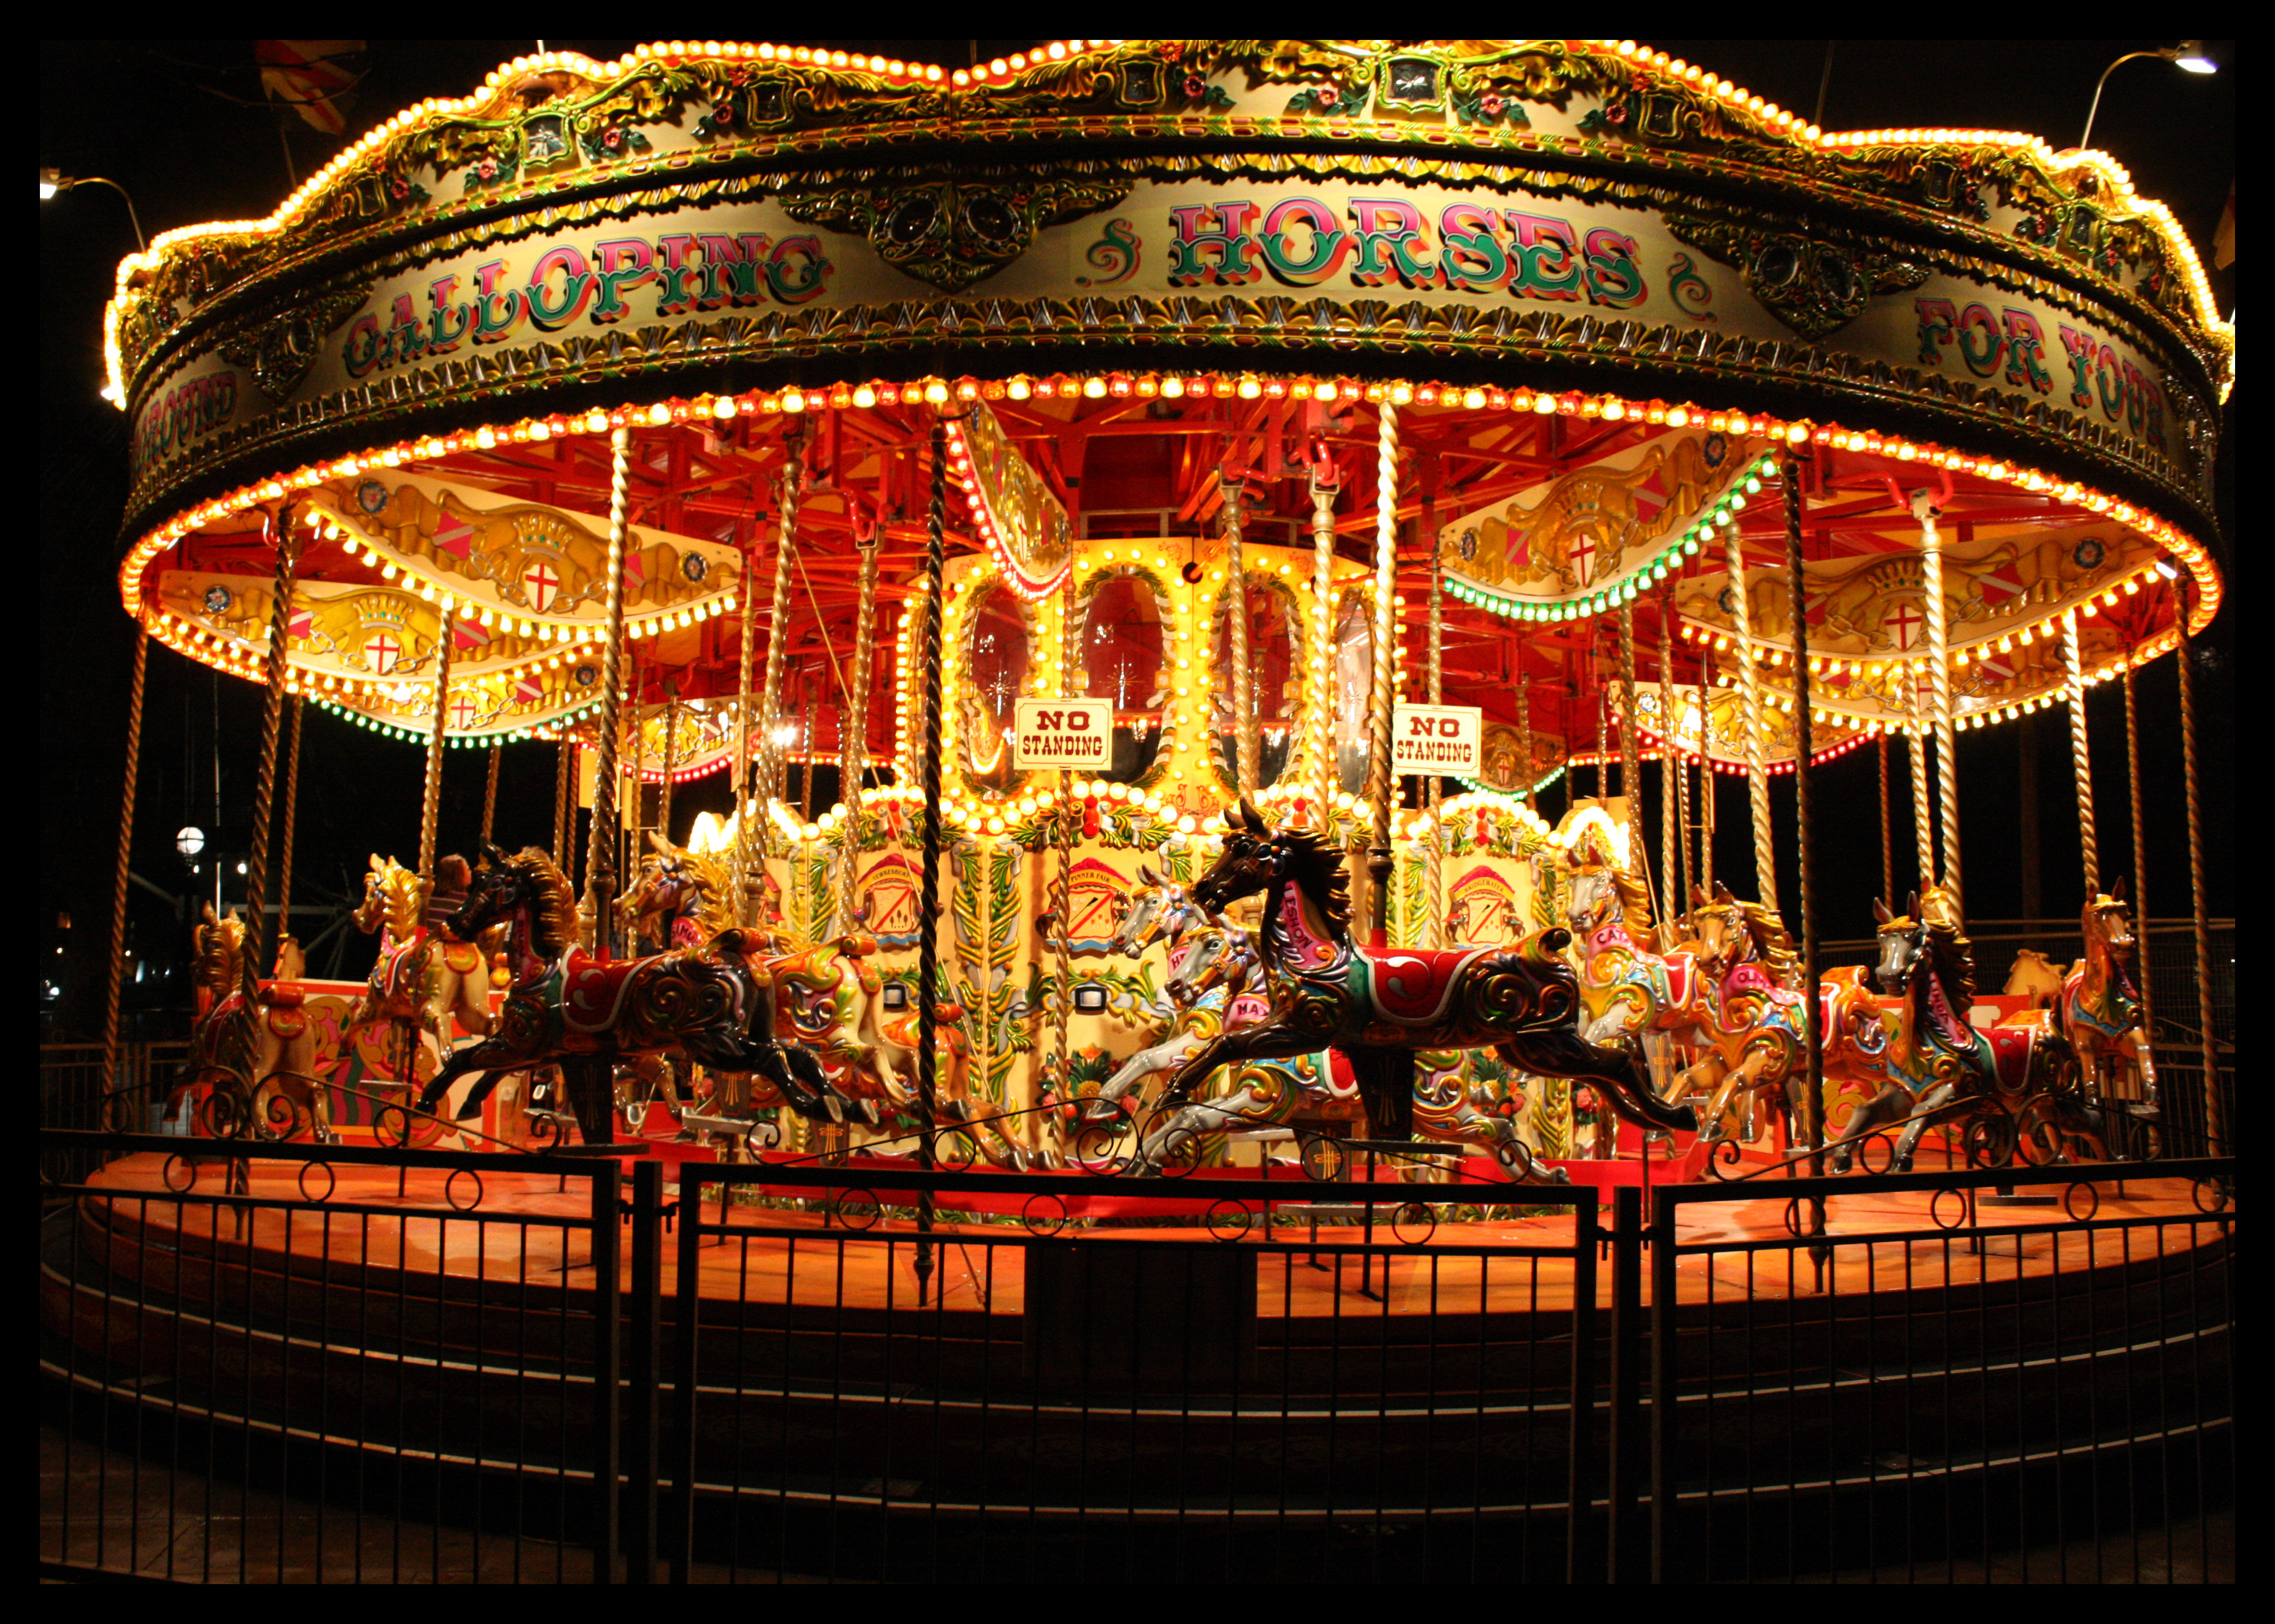 what does the carousel symbolize in catcher in the rye